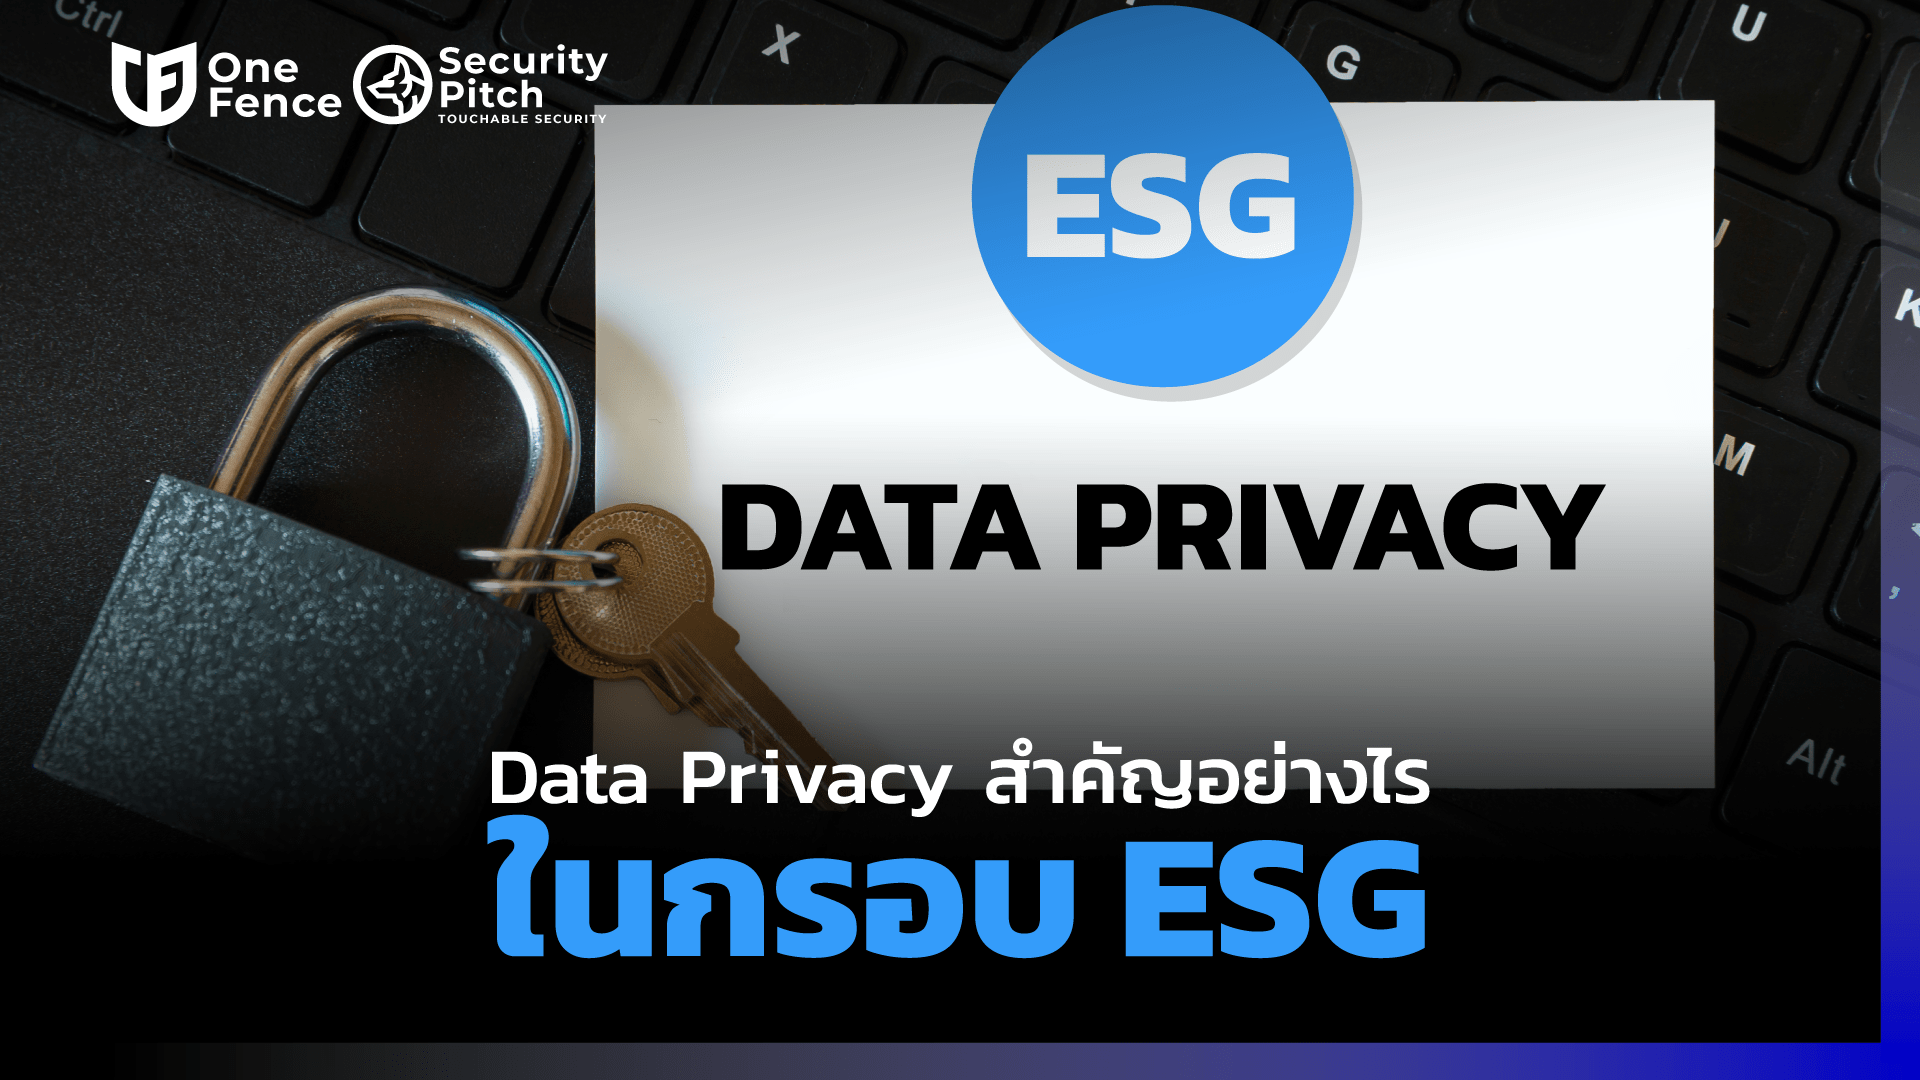 Data Privacy with ESG